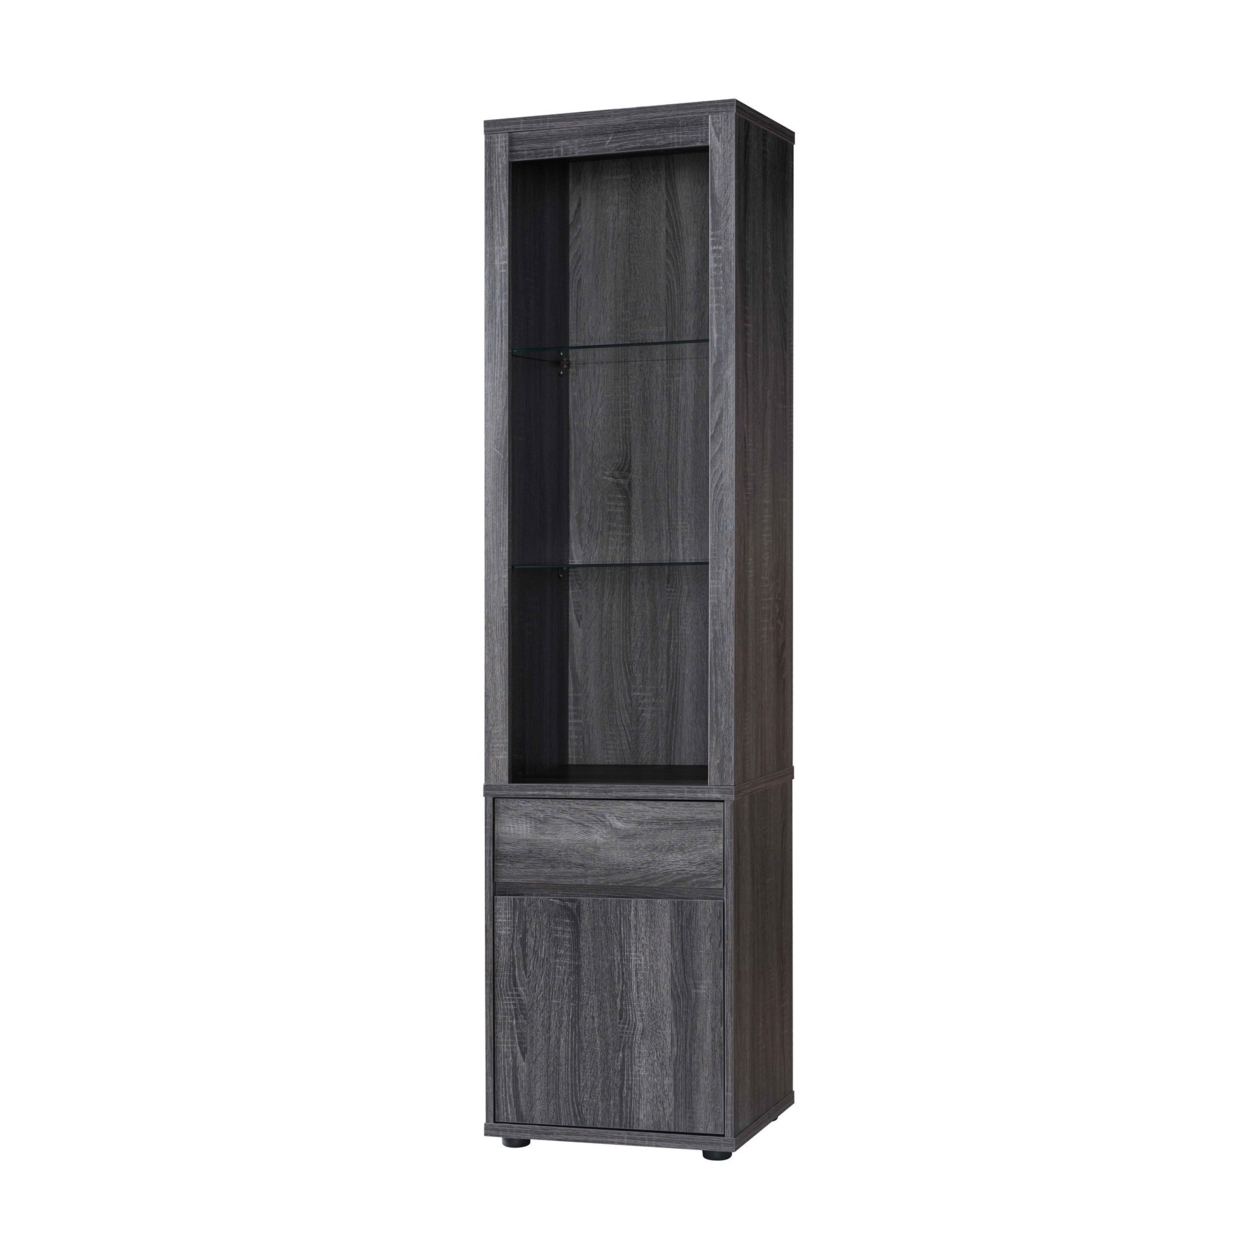 Wooden Curio Cabinet With 2 Glass Shelves And Cabinet, Gray- Saltoro Sherpi